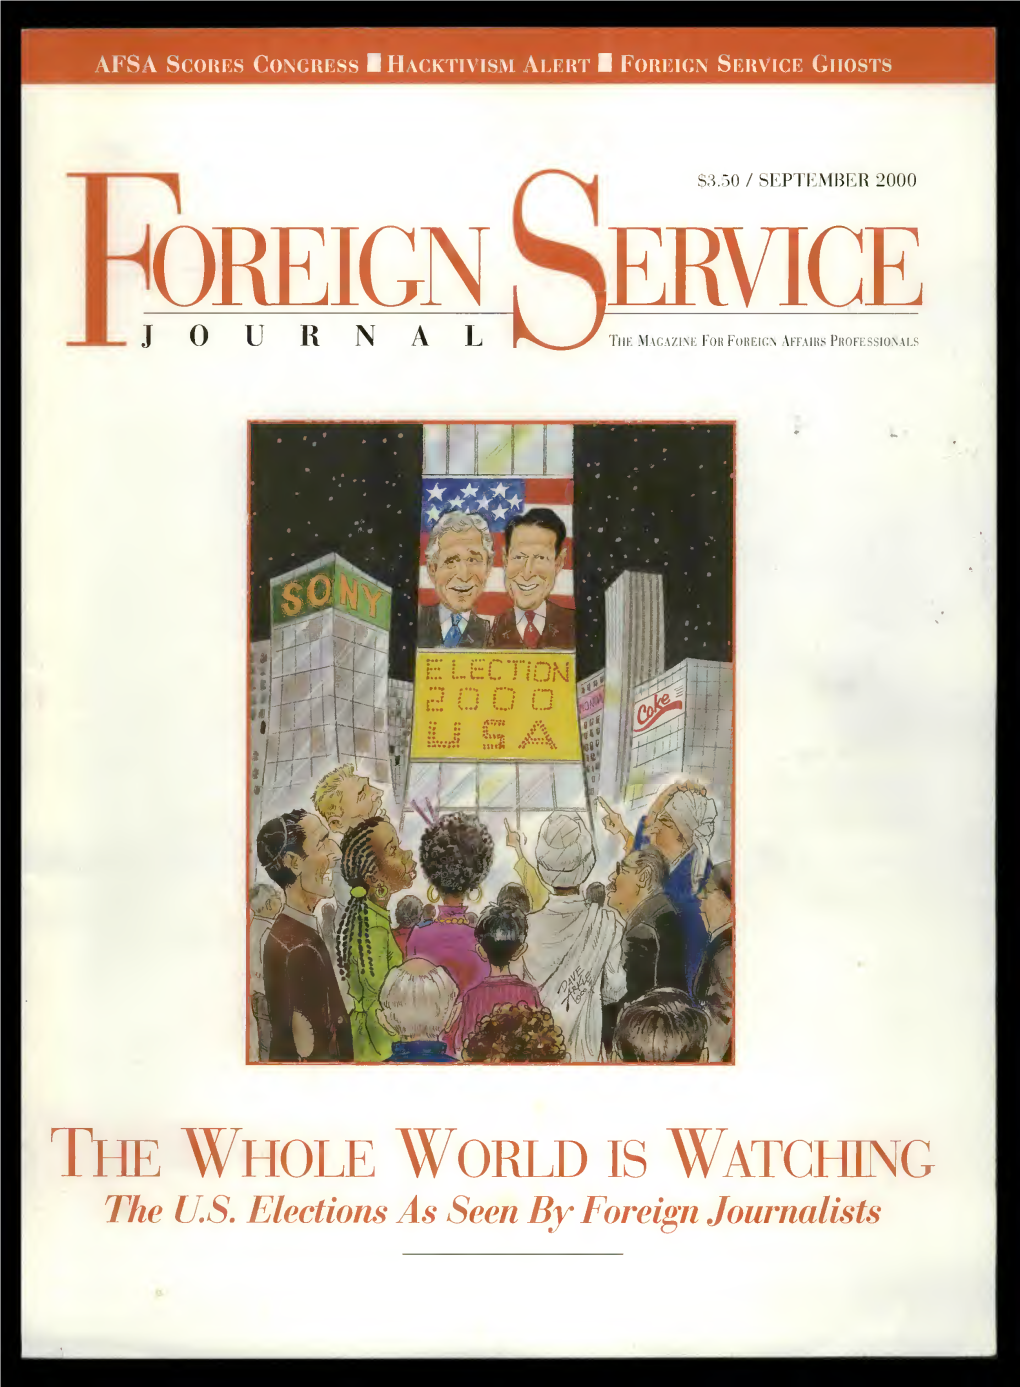 The Foreign Service Journal, September 2000